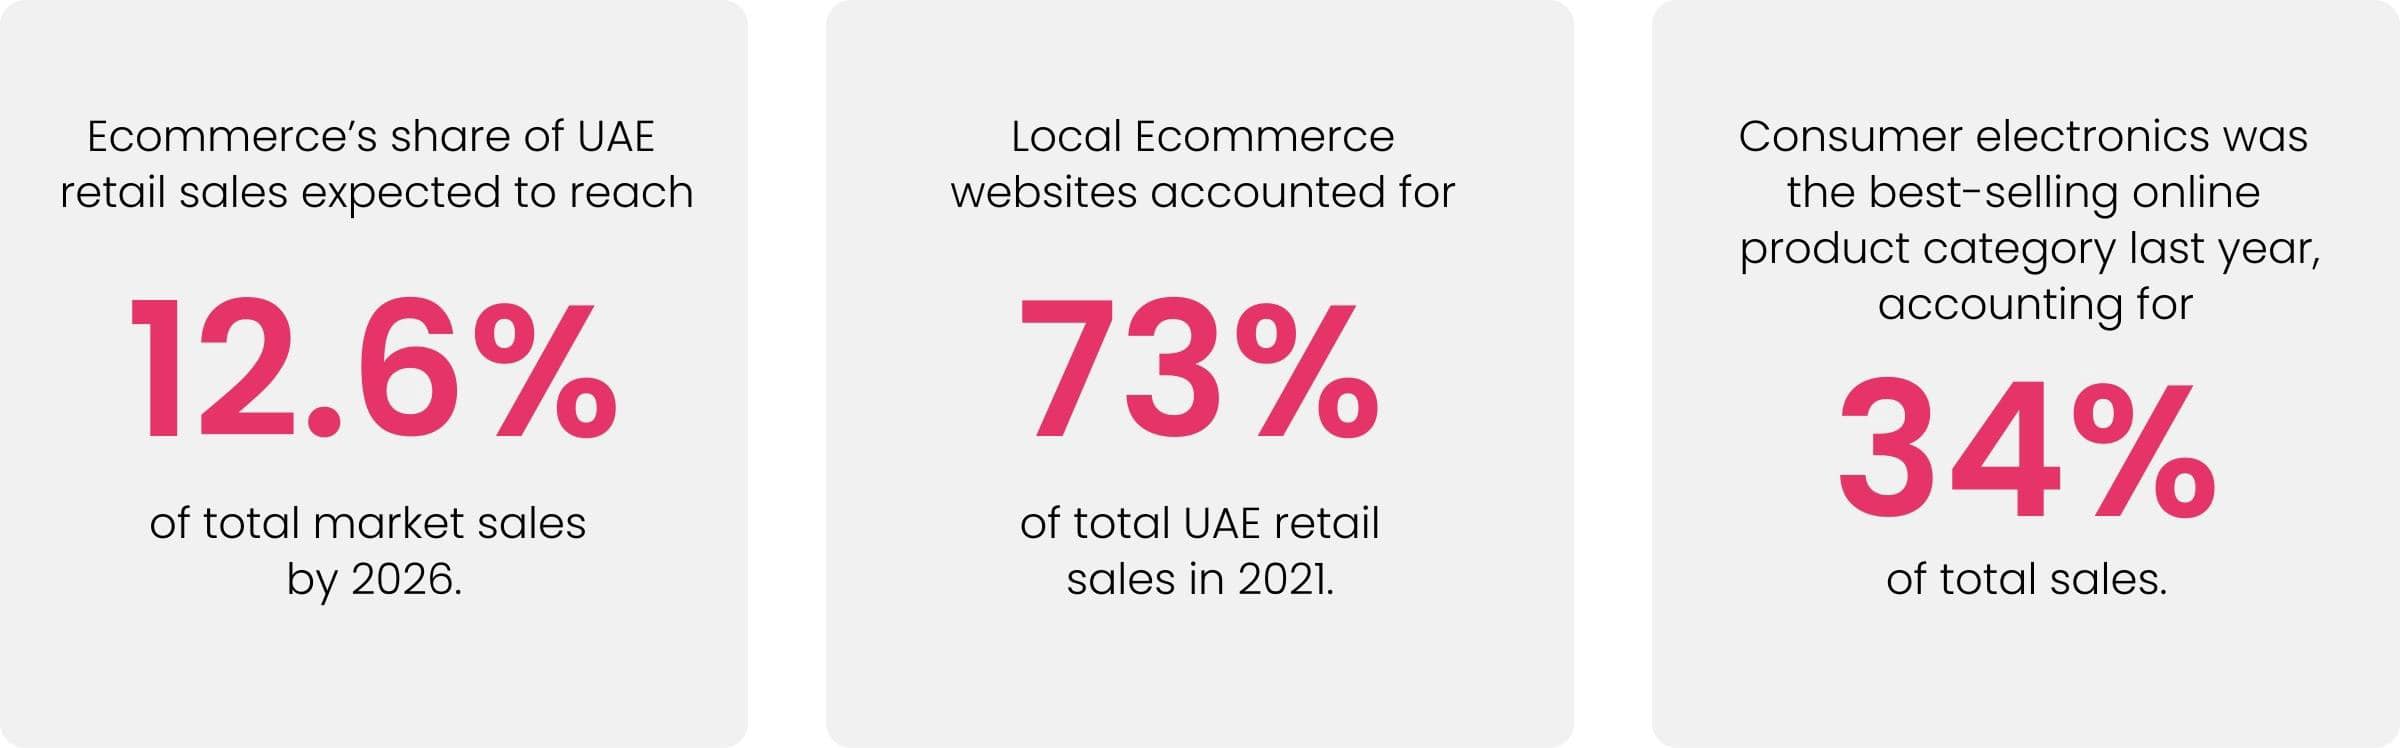 Ecommerce Business in UAE: Now is the Right Time